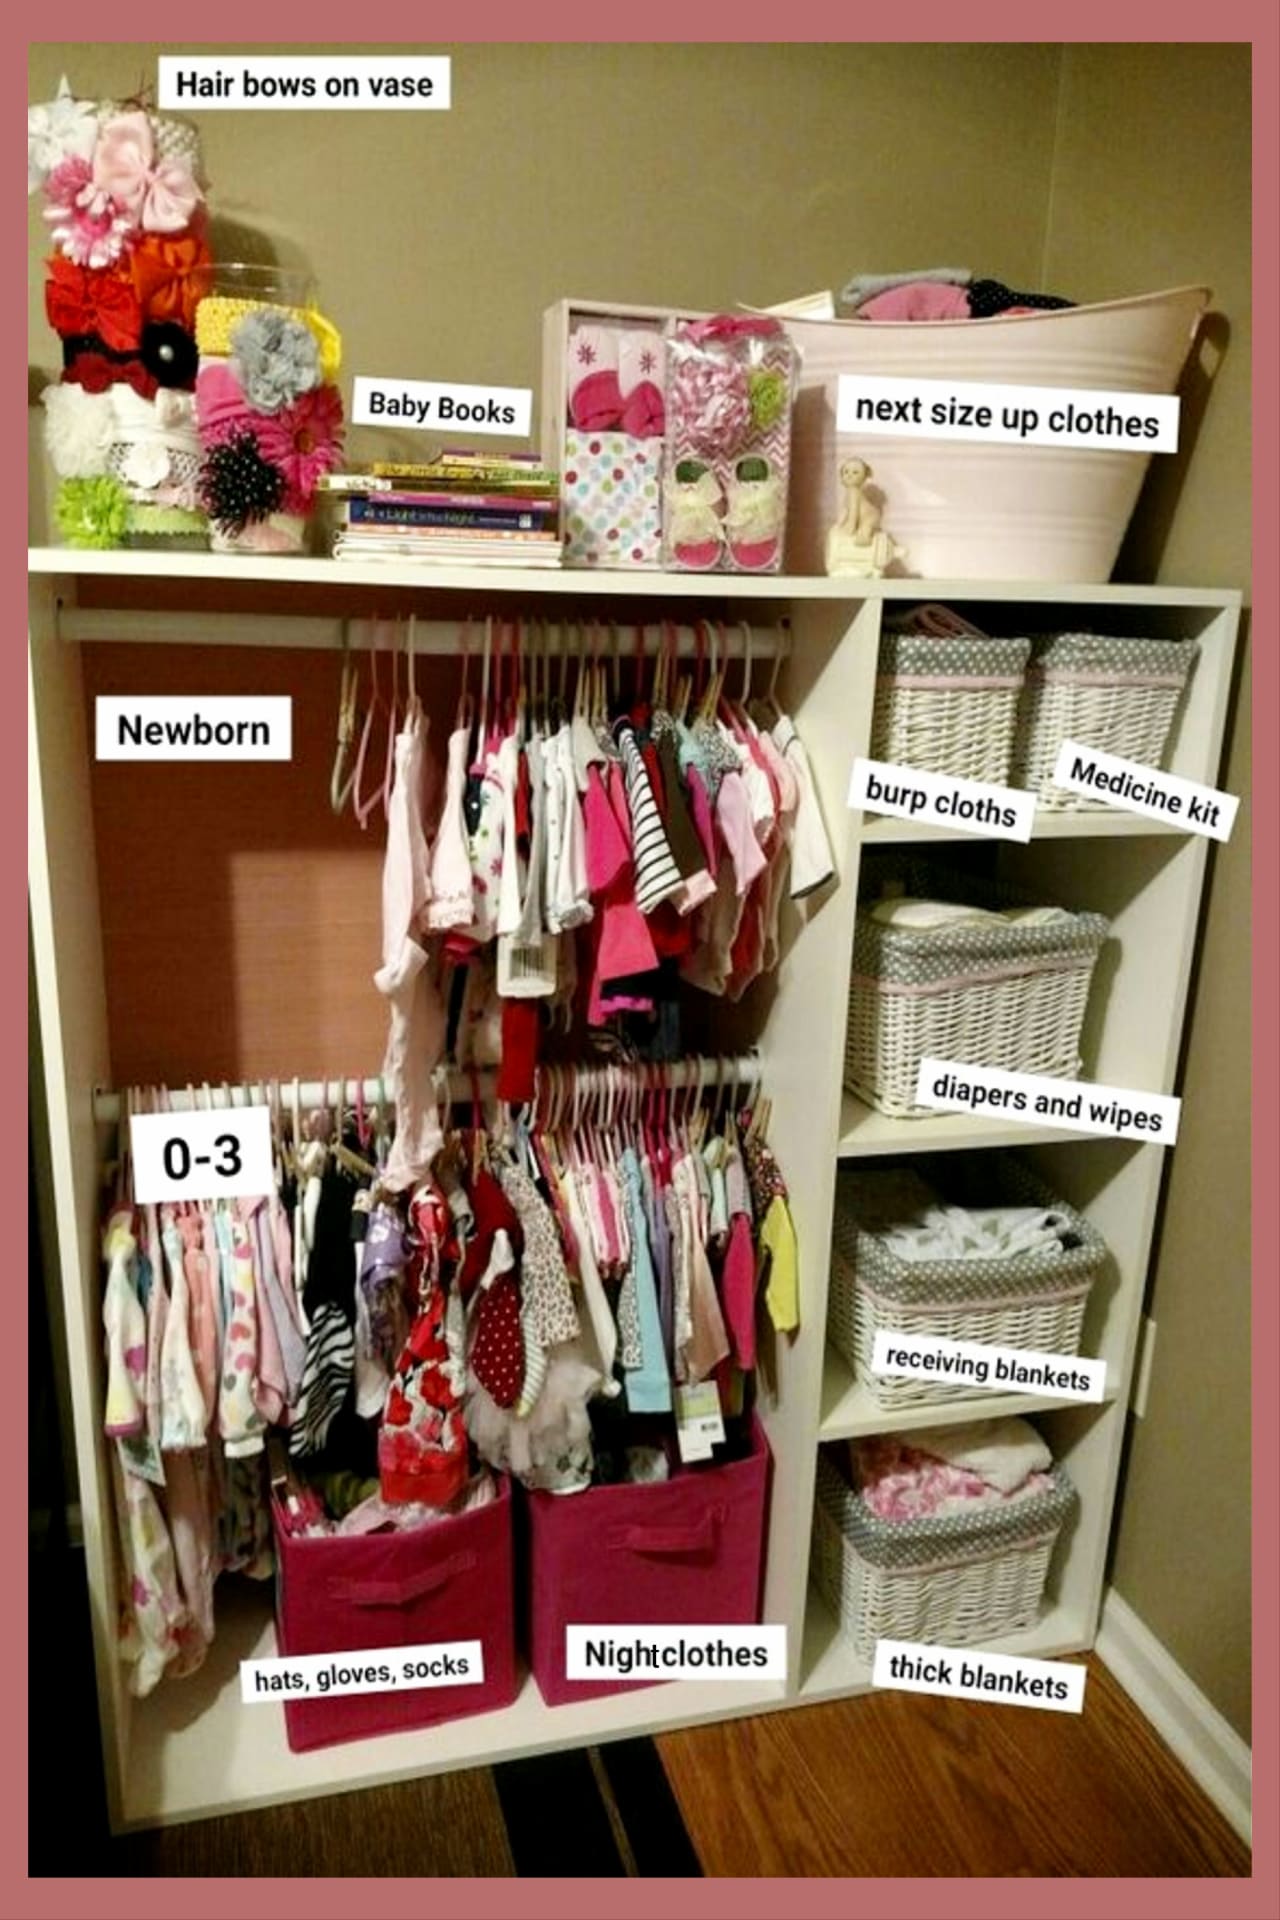 Creative storage solutions for a small baby room without a closet - no closet solutions and more brillain organization ideas for the home in the nursery